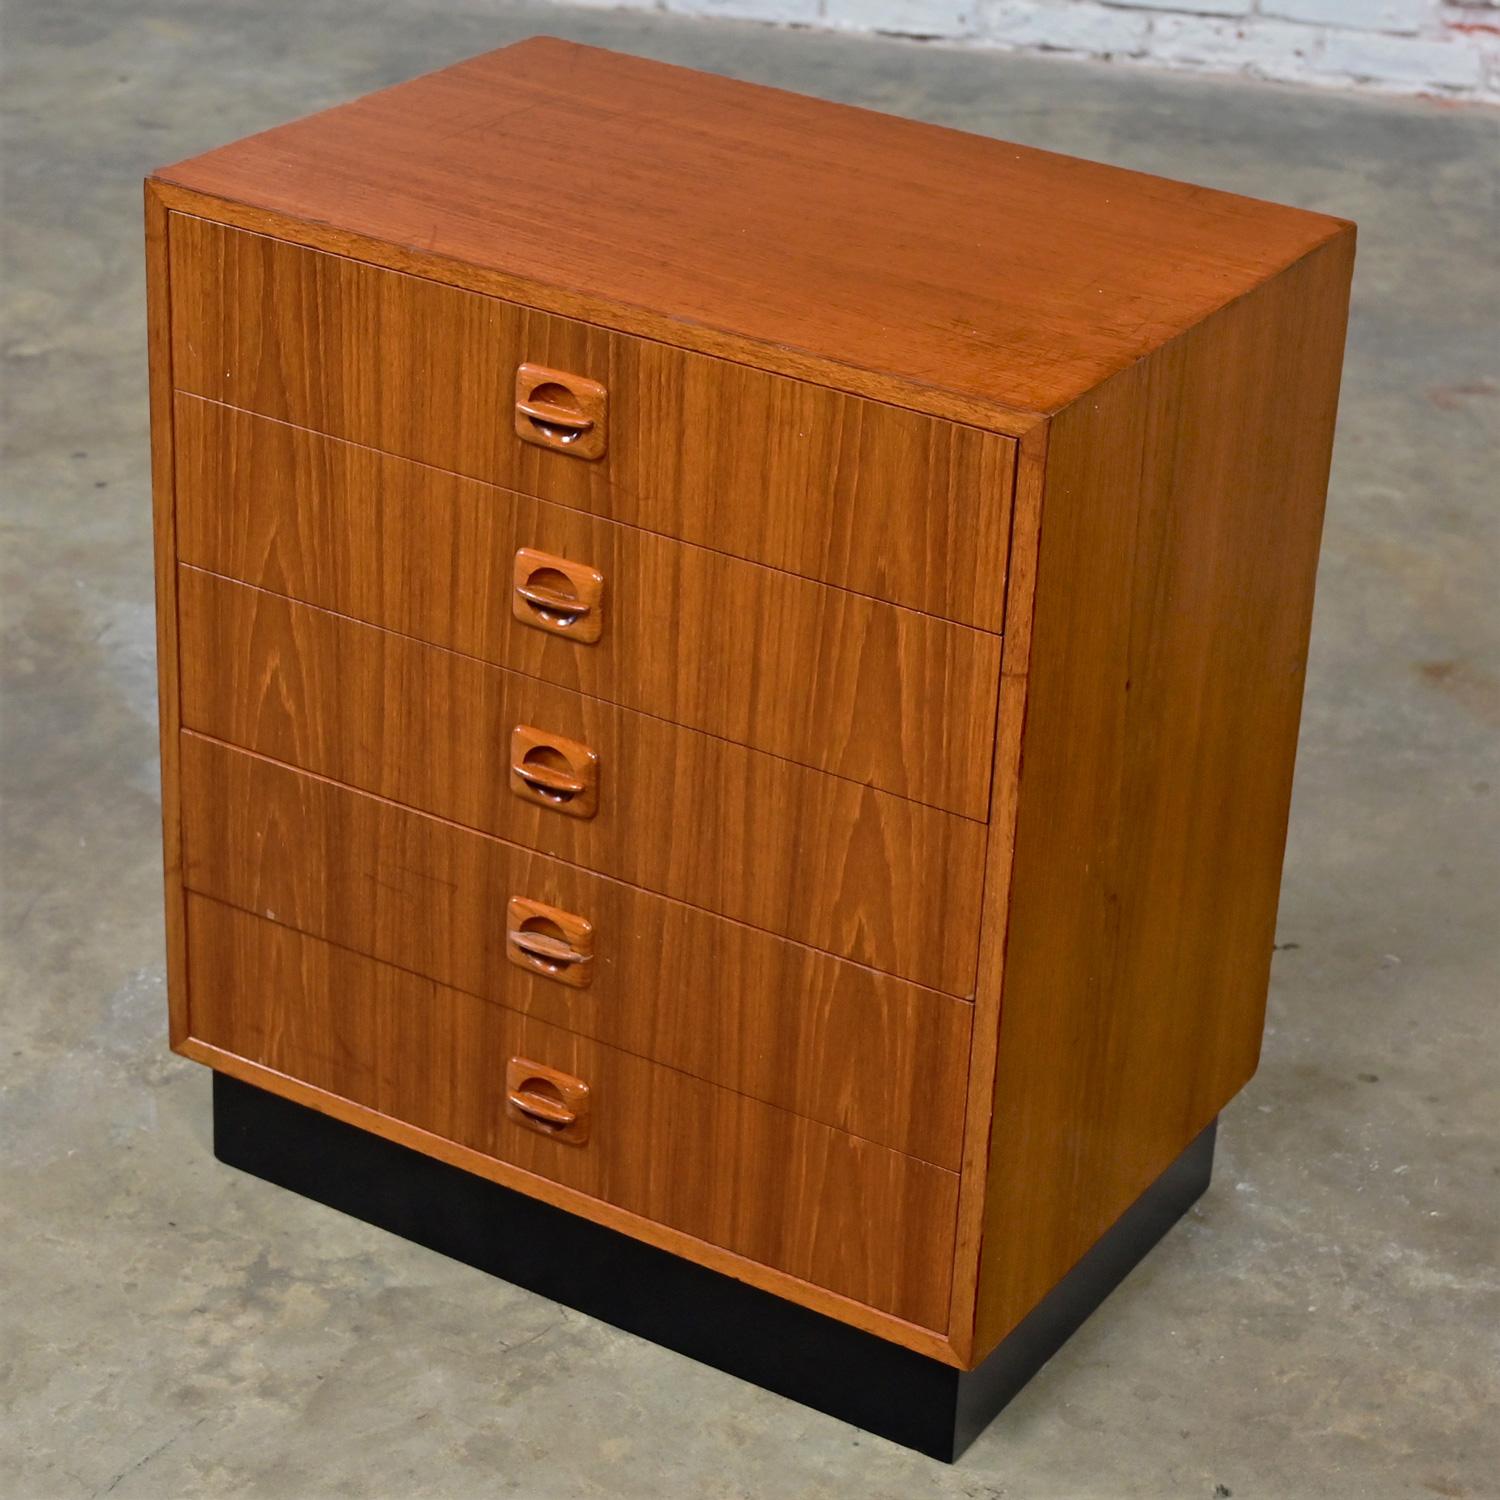 Lovely Mid to Late 20th Century Scandinavian Modern teak cabinet with 5 graduated drawers, sculpted teak pulls, & a newly added black painted plinth base. Beautiful condition, keeping in mind that this is vintage and not new so will have signs of